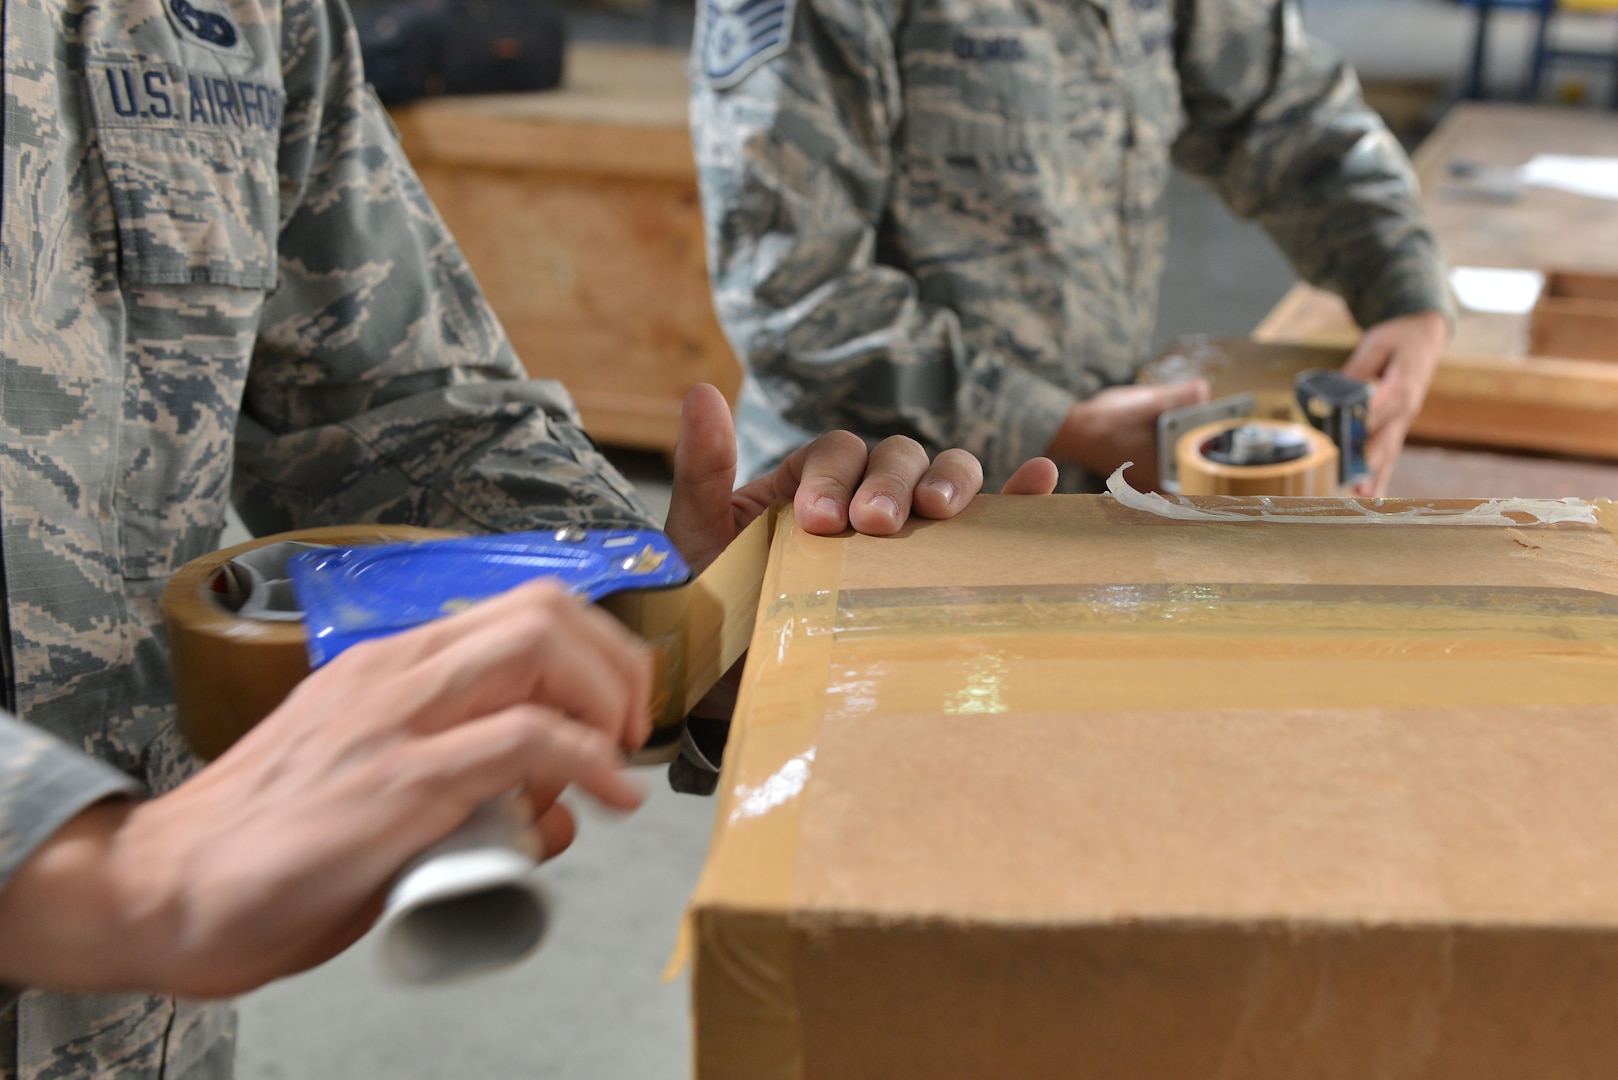 U.S. Air Force Airman 1st Class Daniel Josephson (left), 39th Logistics Readiness Squadron (LRS) traffic management journeyman and Staff Sgt. Amanda Olmos, 39th LRS outbound cargo noncommissioned officer in charge, prepare boxes for shipment Sept. 29, 2016, at Incirlik Air Base, Turkey. Cargo is packaged and accounted for prior to being transported. (U.S. Air Force photo by Senior Airman John Nieves Camacho)